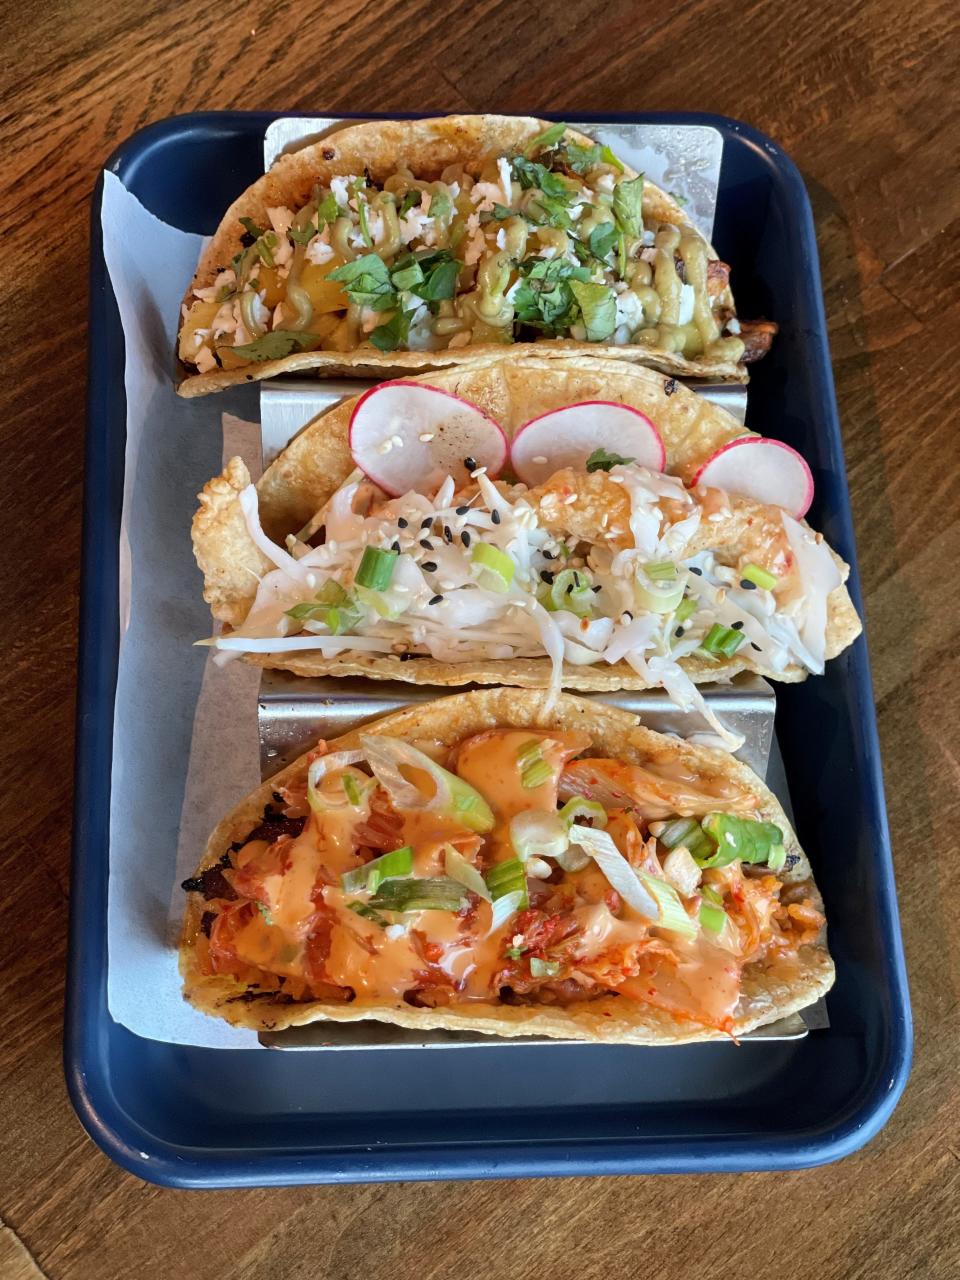 A selection of tacos at Tacos and Tequila in Wyandotte.